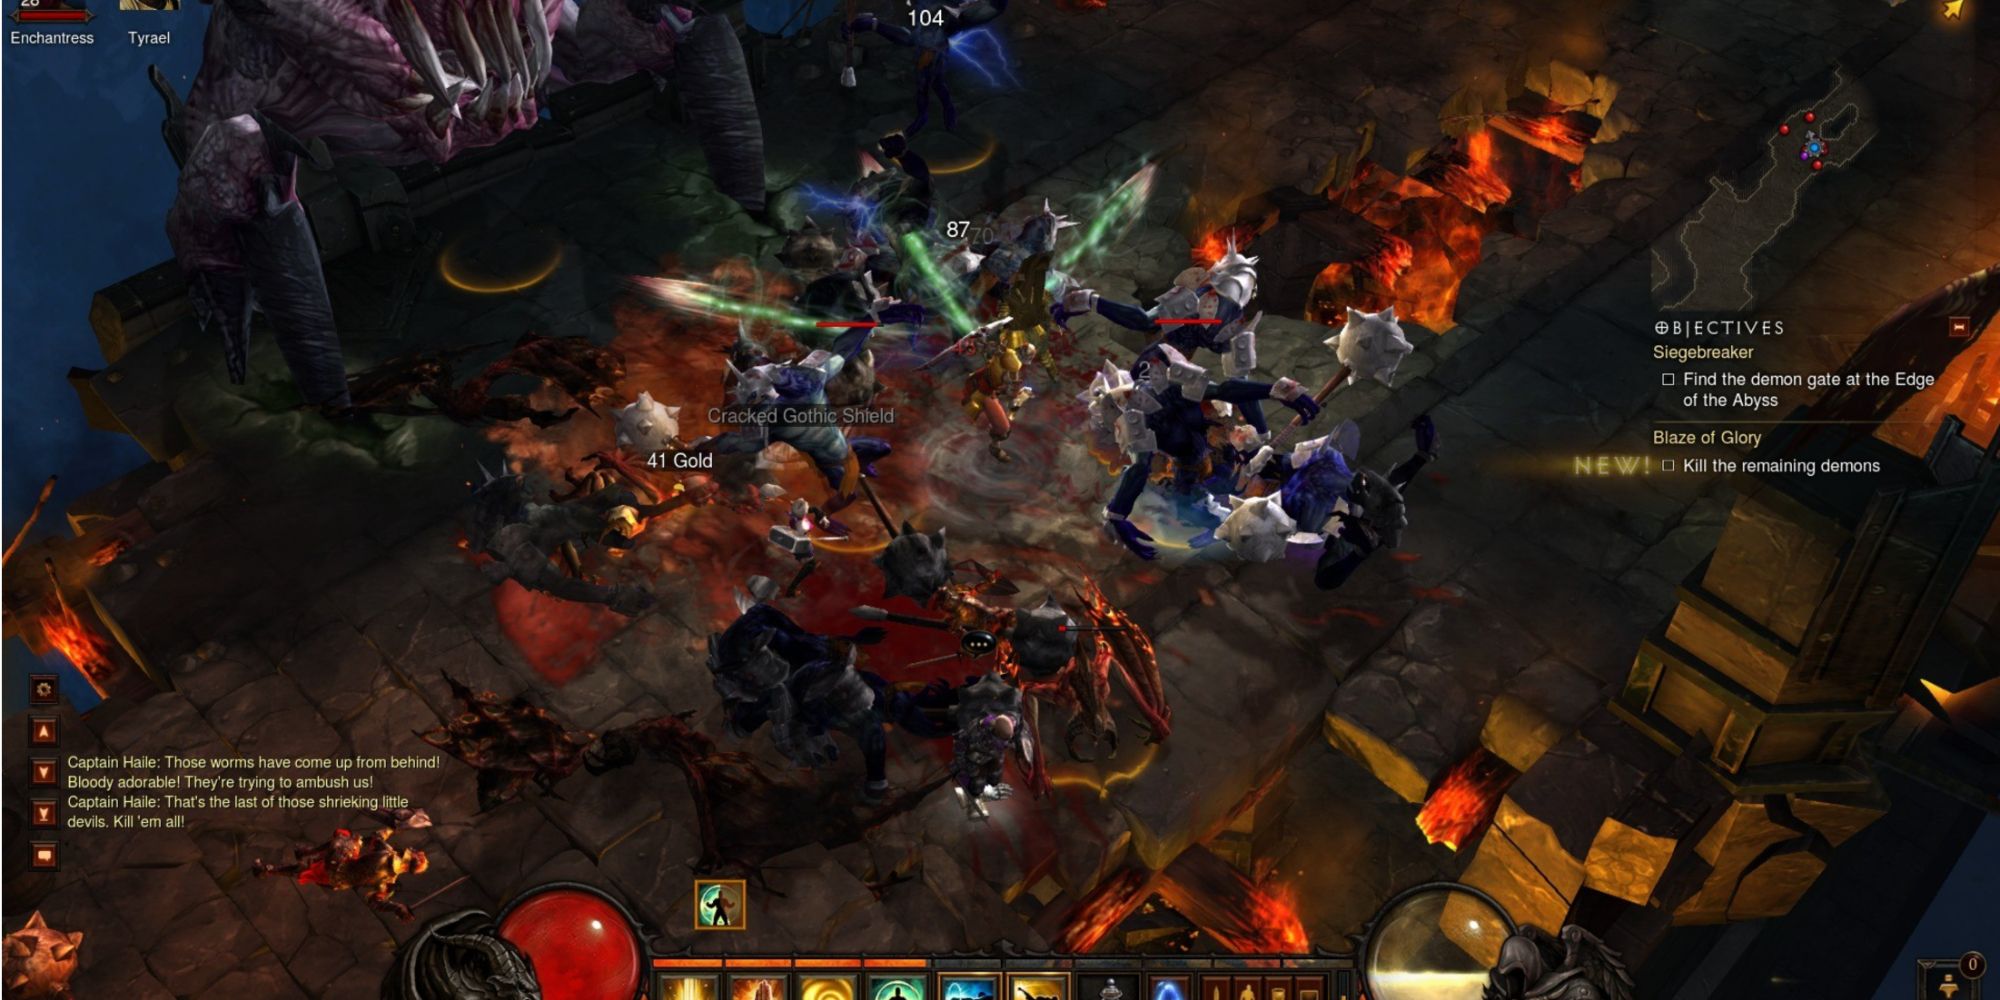 Diablo 3 Player Numbers were well above expectations at launch